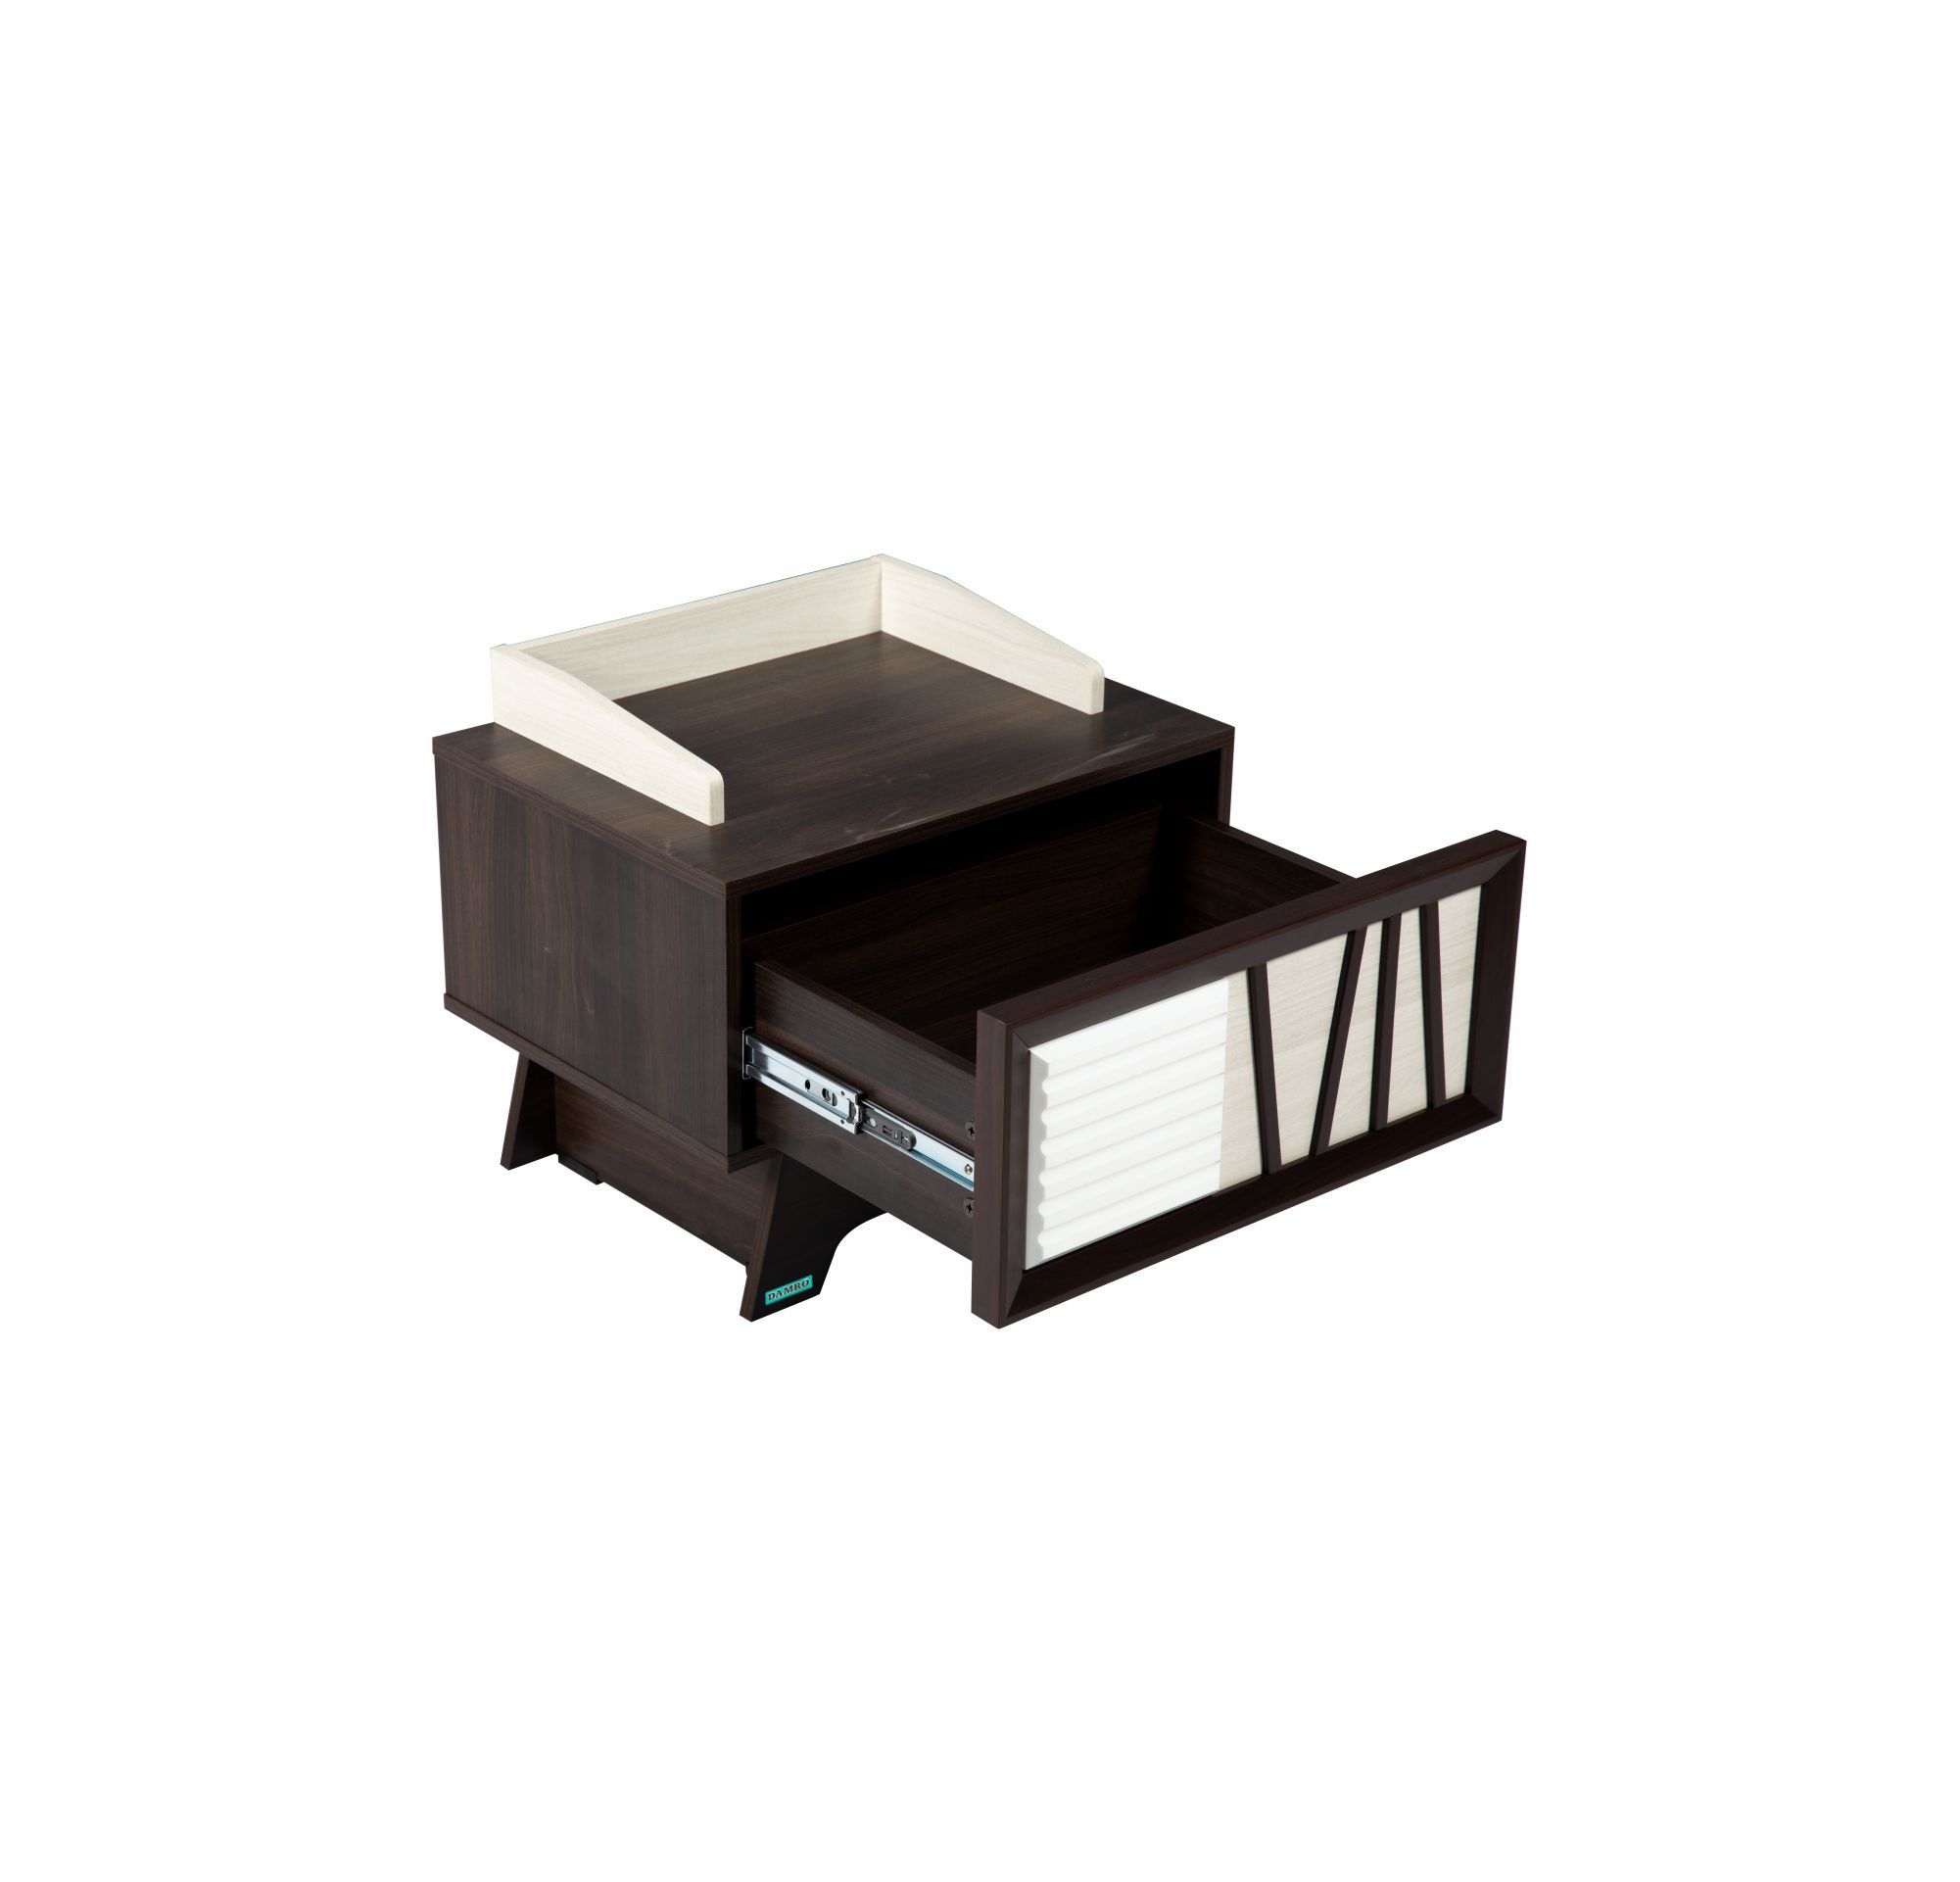 KCAD001-Bed Side Table Andriana-M42/M41